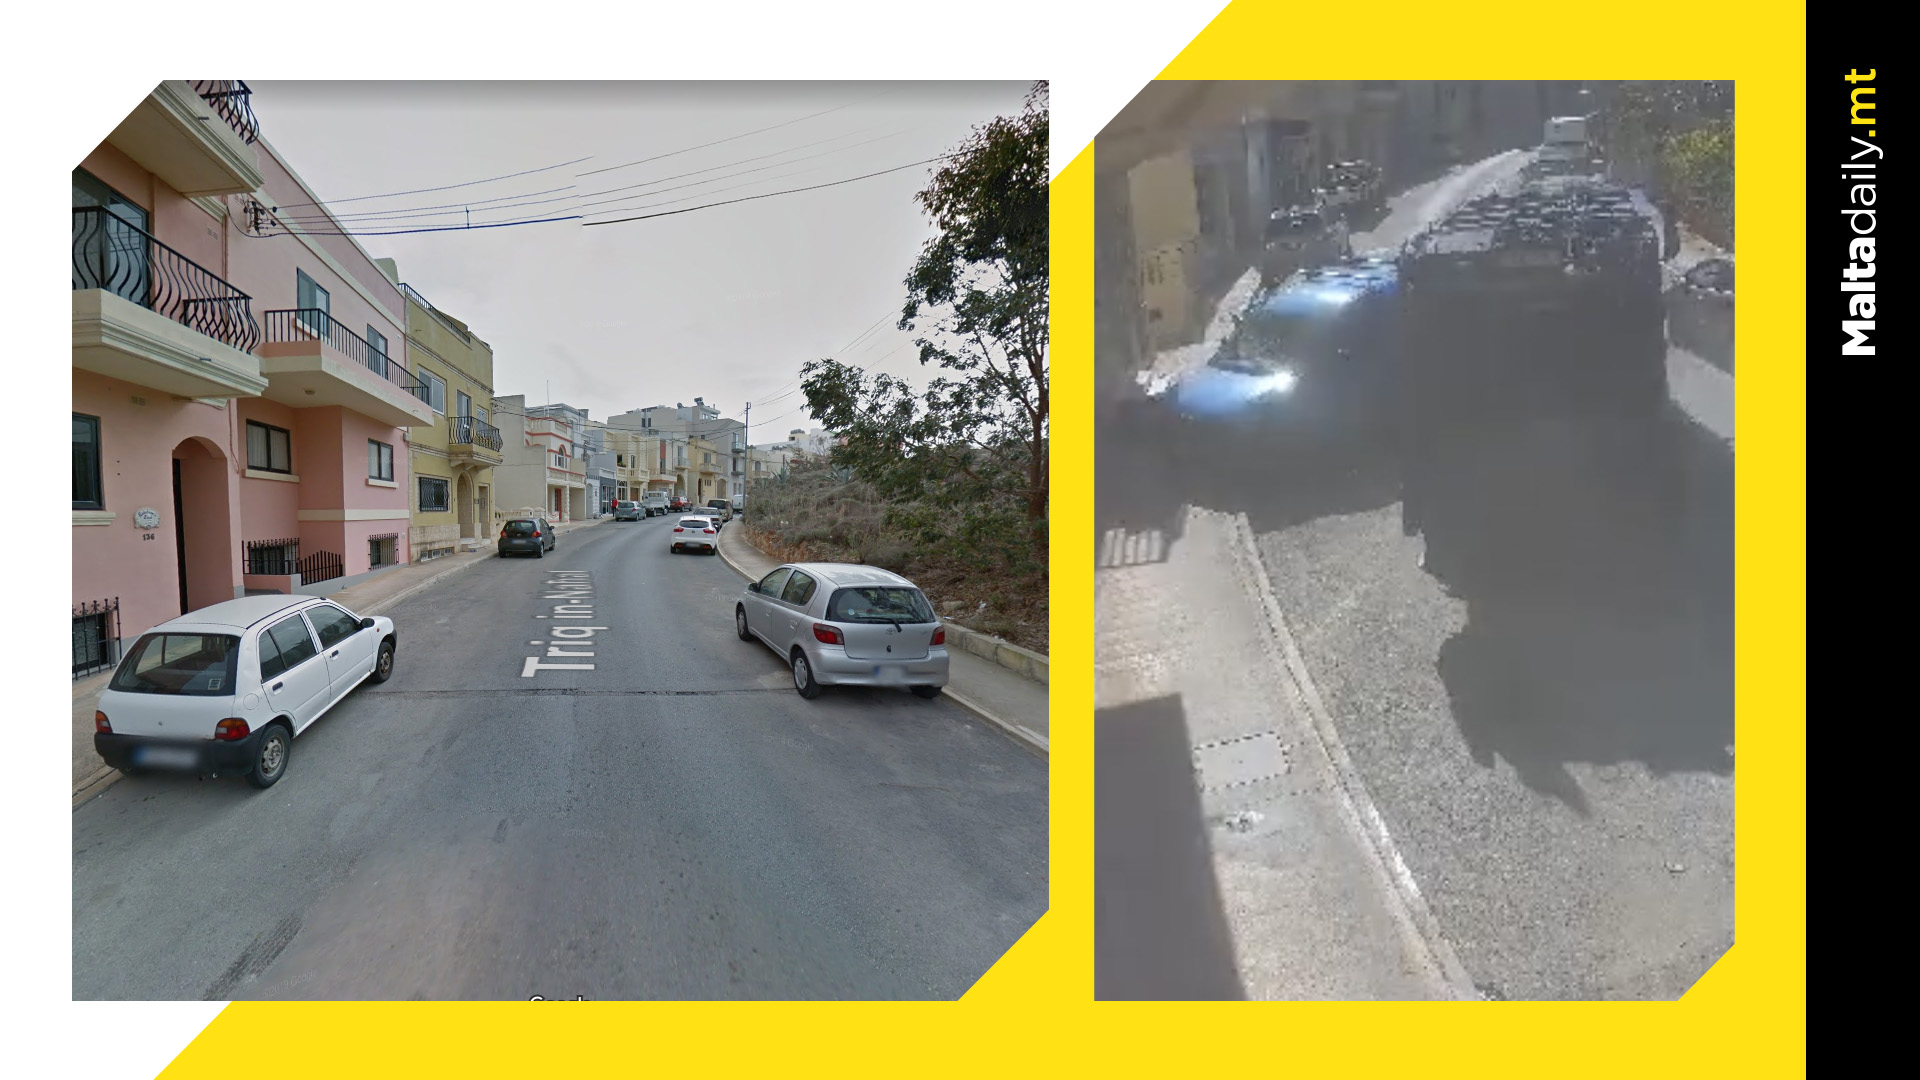 Carnage in Mellieha as garbage truck crashes into multiple vehicles